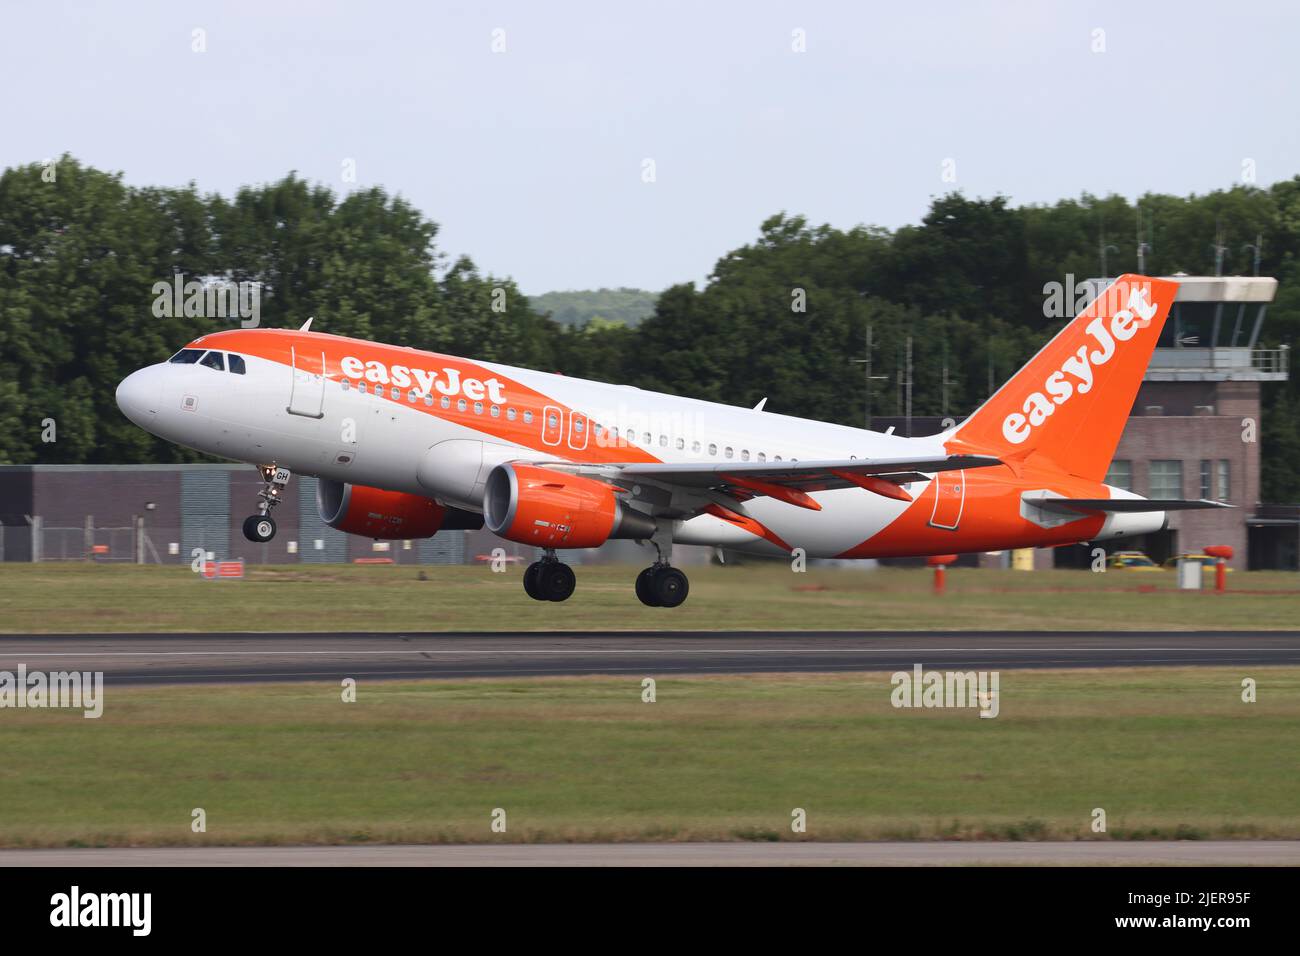 Easyjet, Airbus A319 G-EZGH, leaving Stansted Airport, Essex, UK Stock Photo